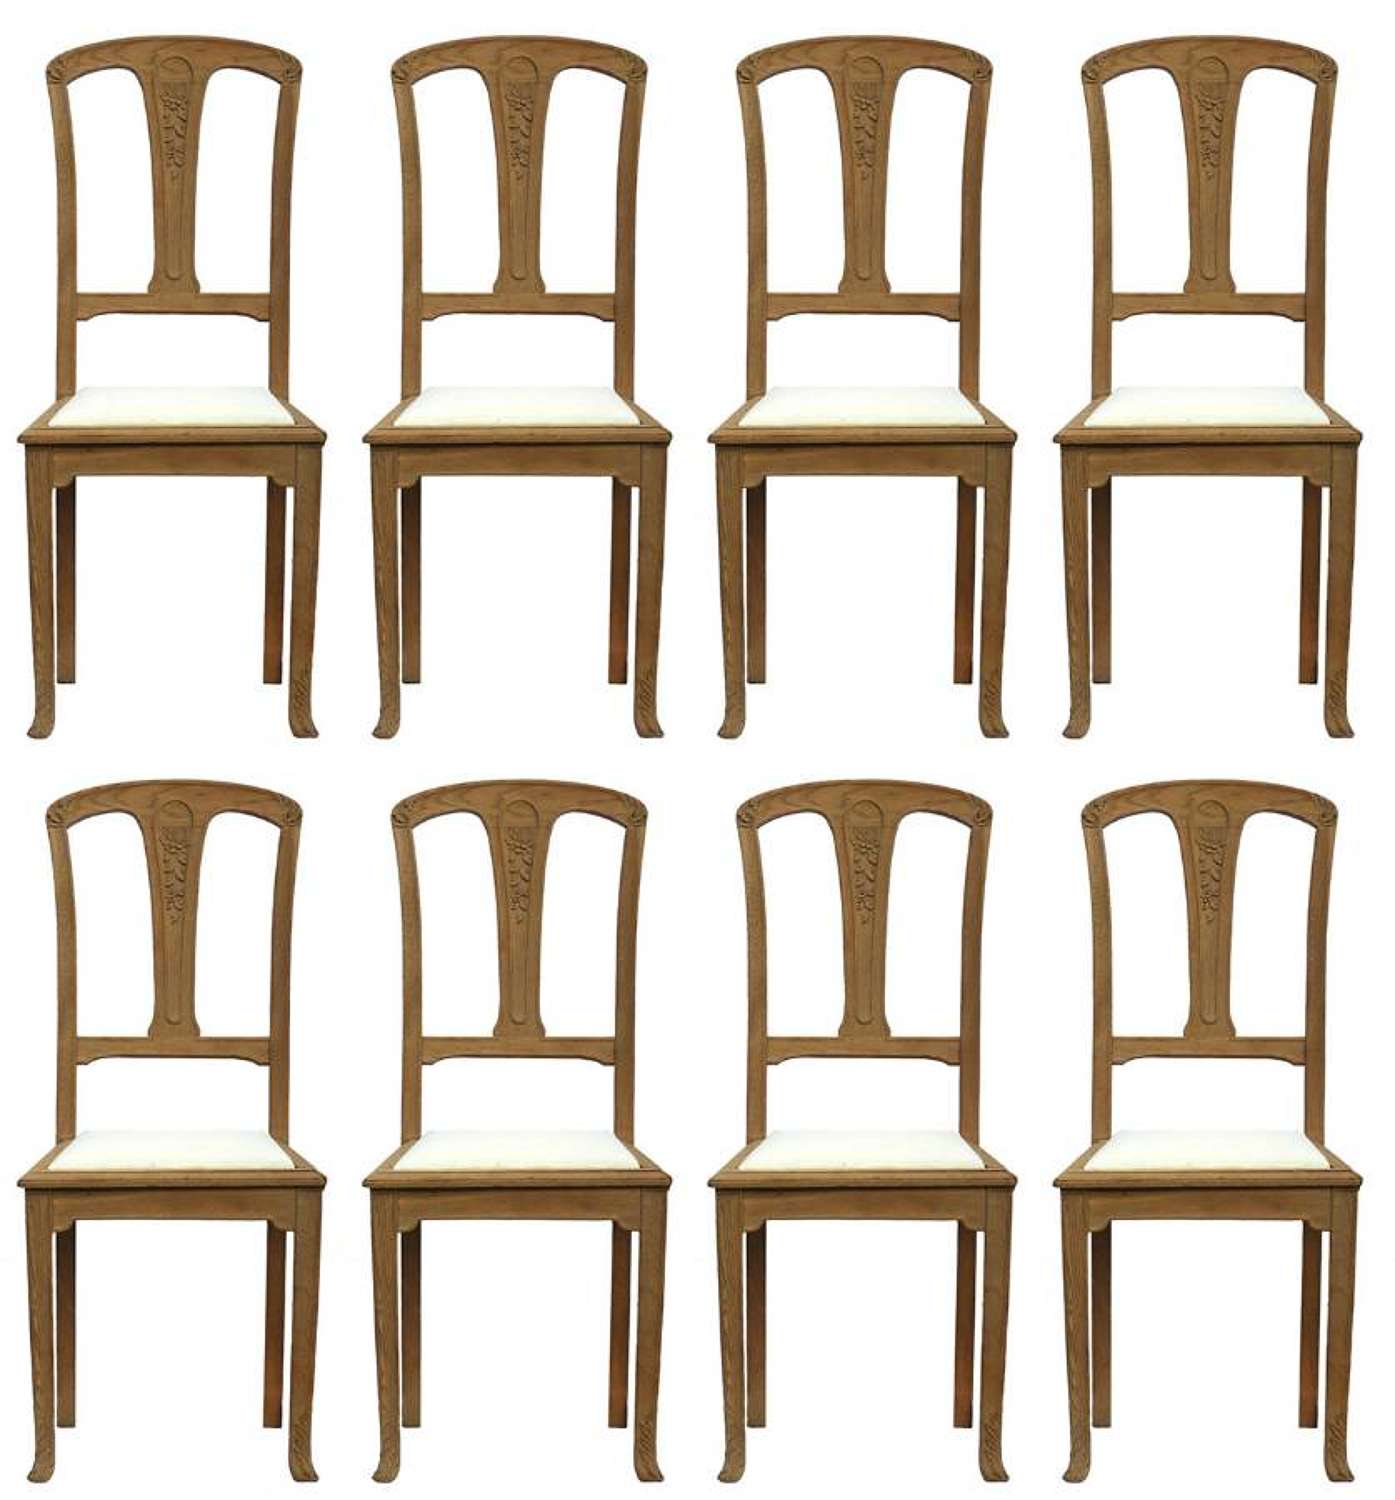 Eight Dining Chairs French Art Nouveau Arts and Crafts Oak c1900